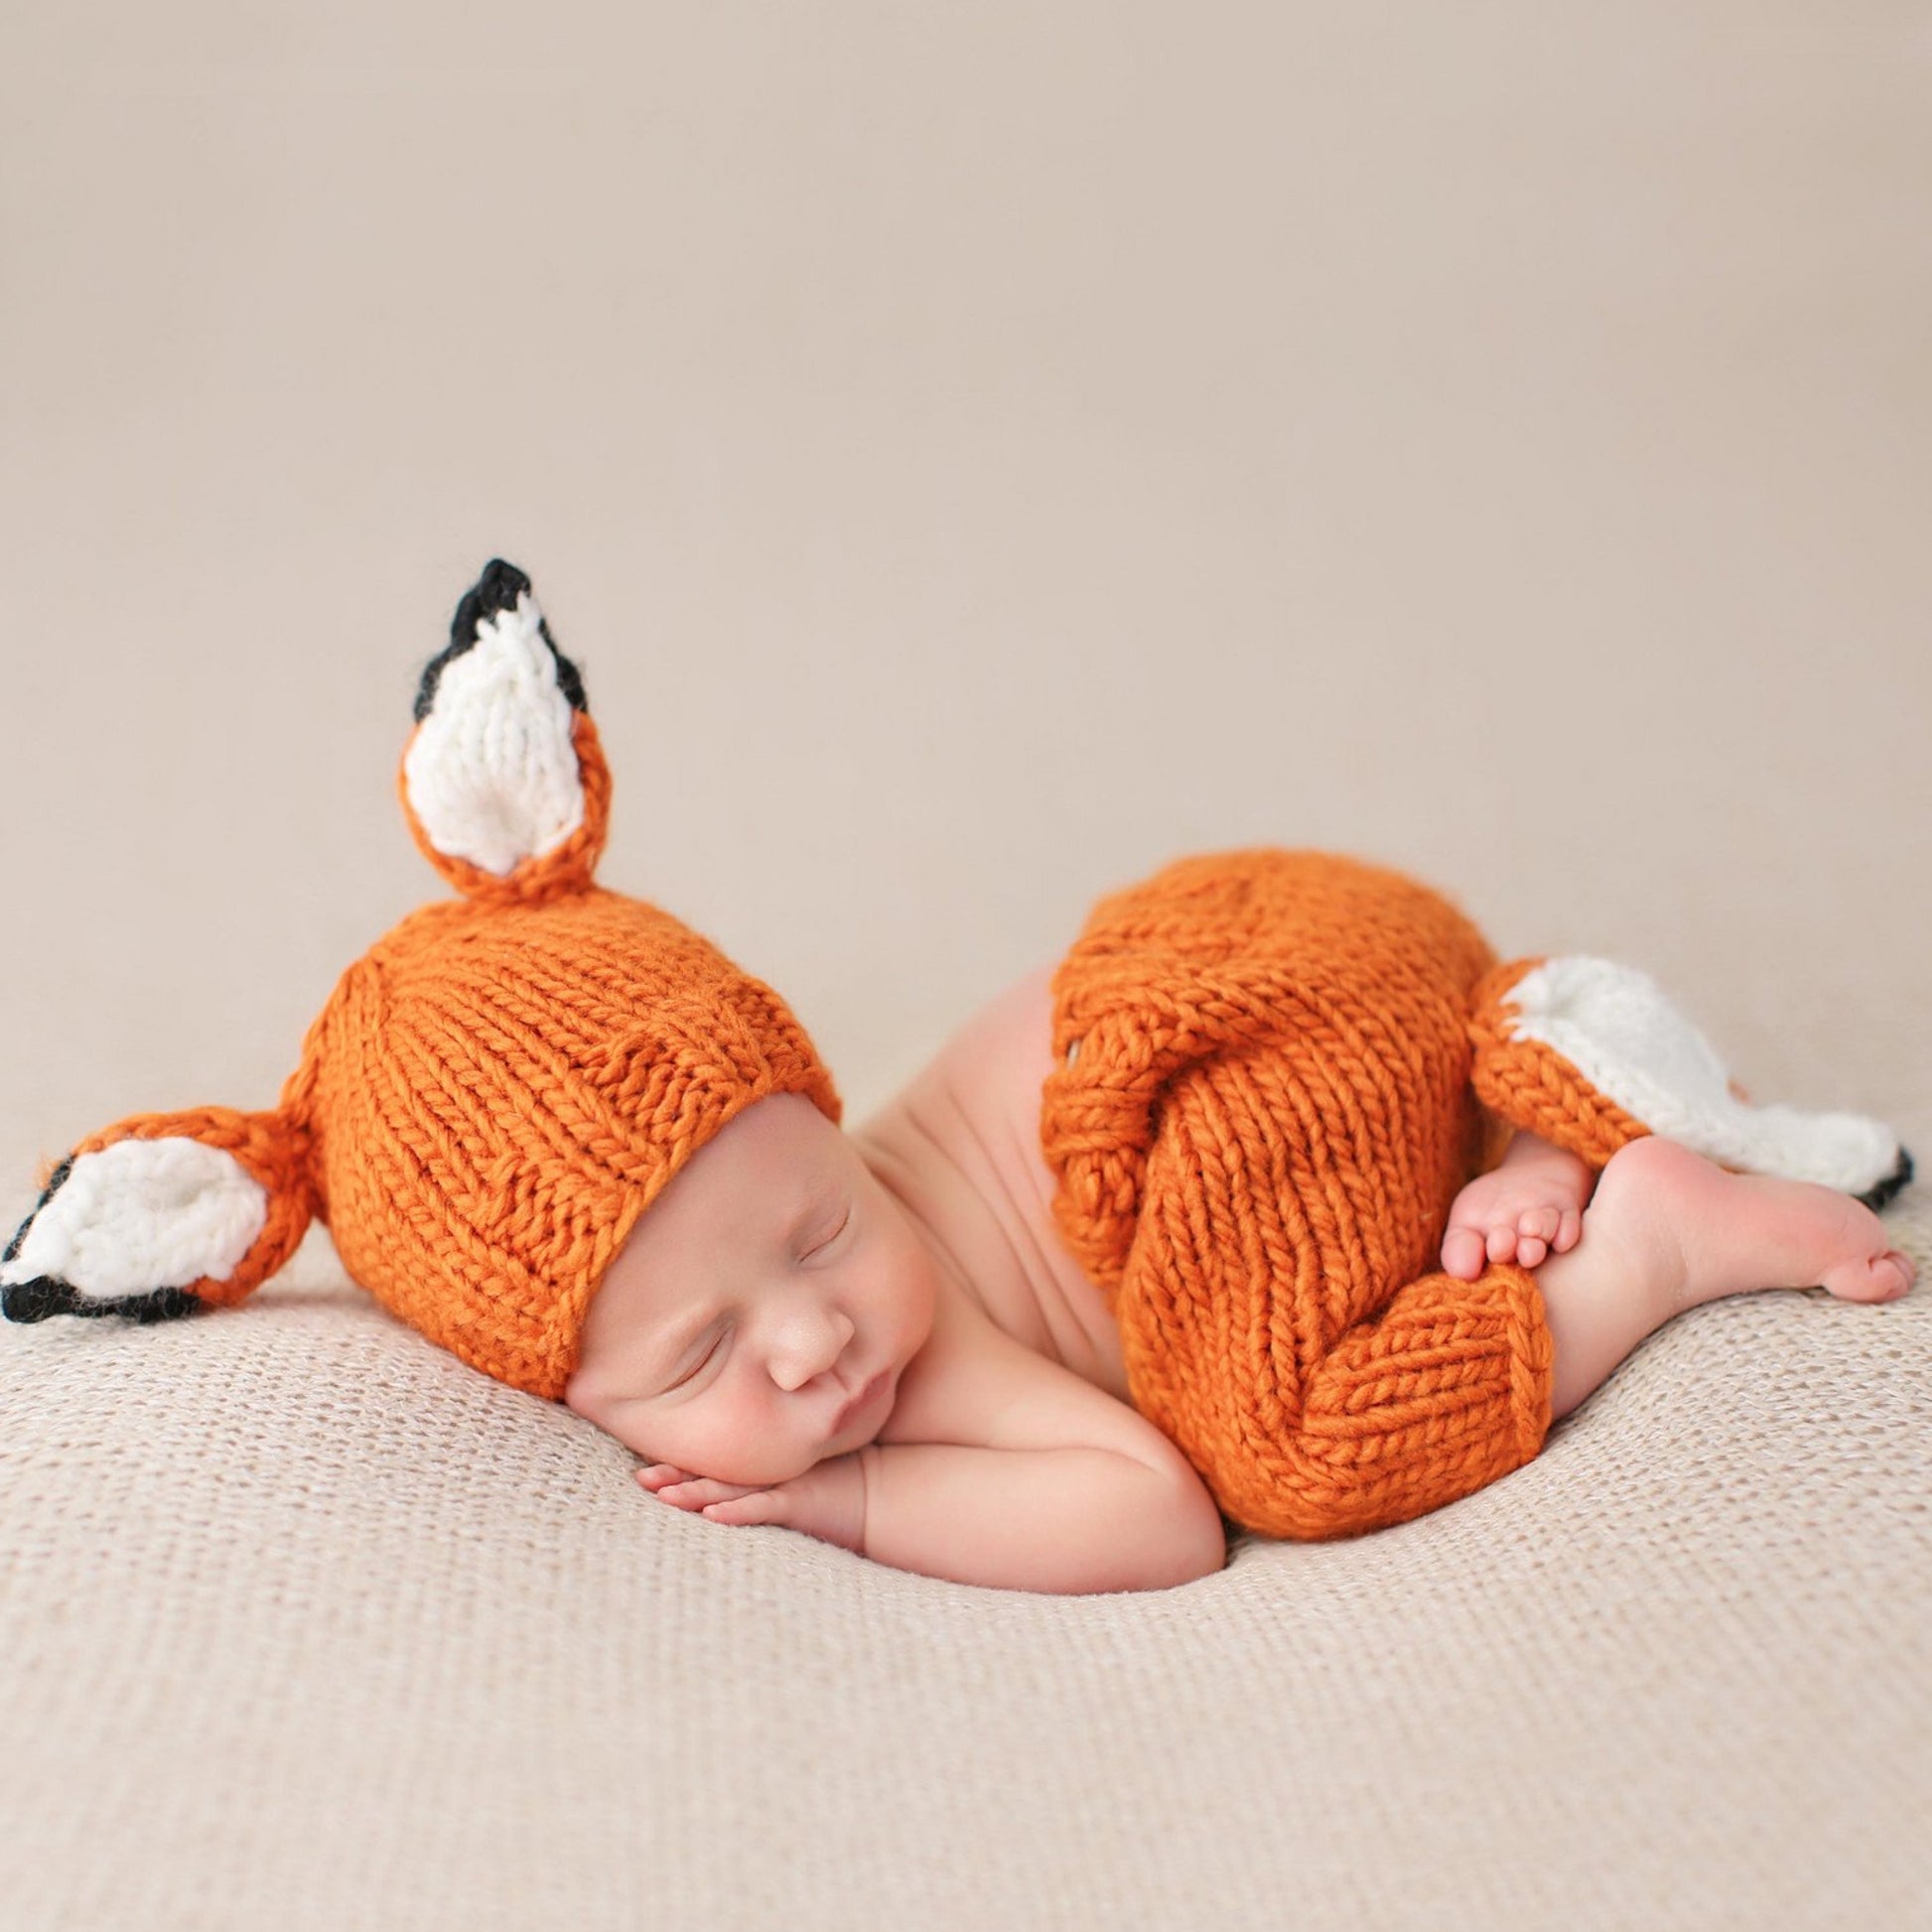 hand knit orange fox hat and pants set for baby with white ears and tail